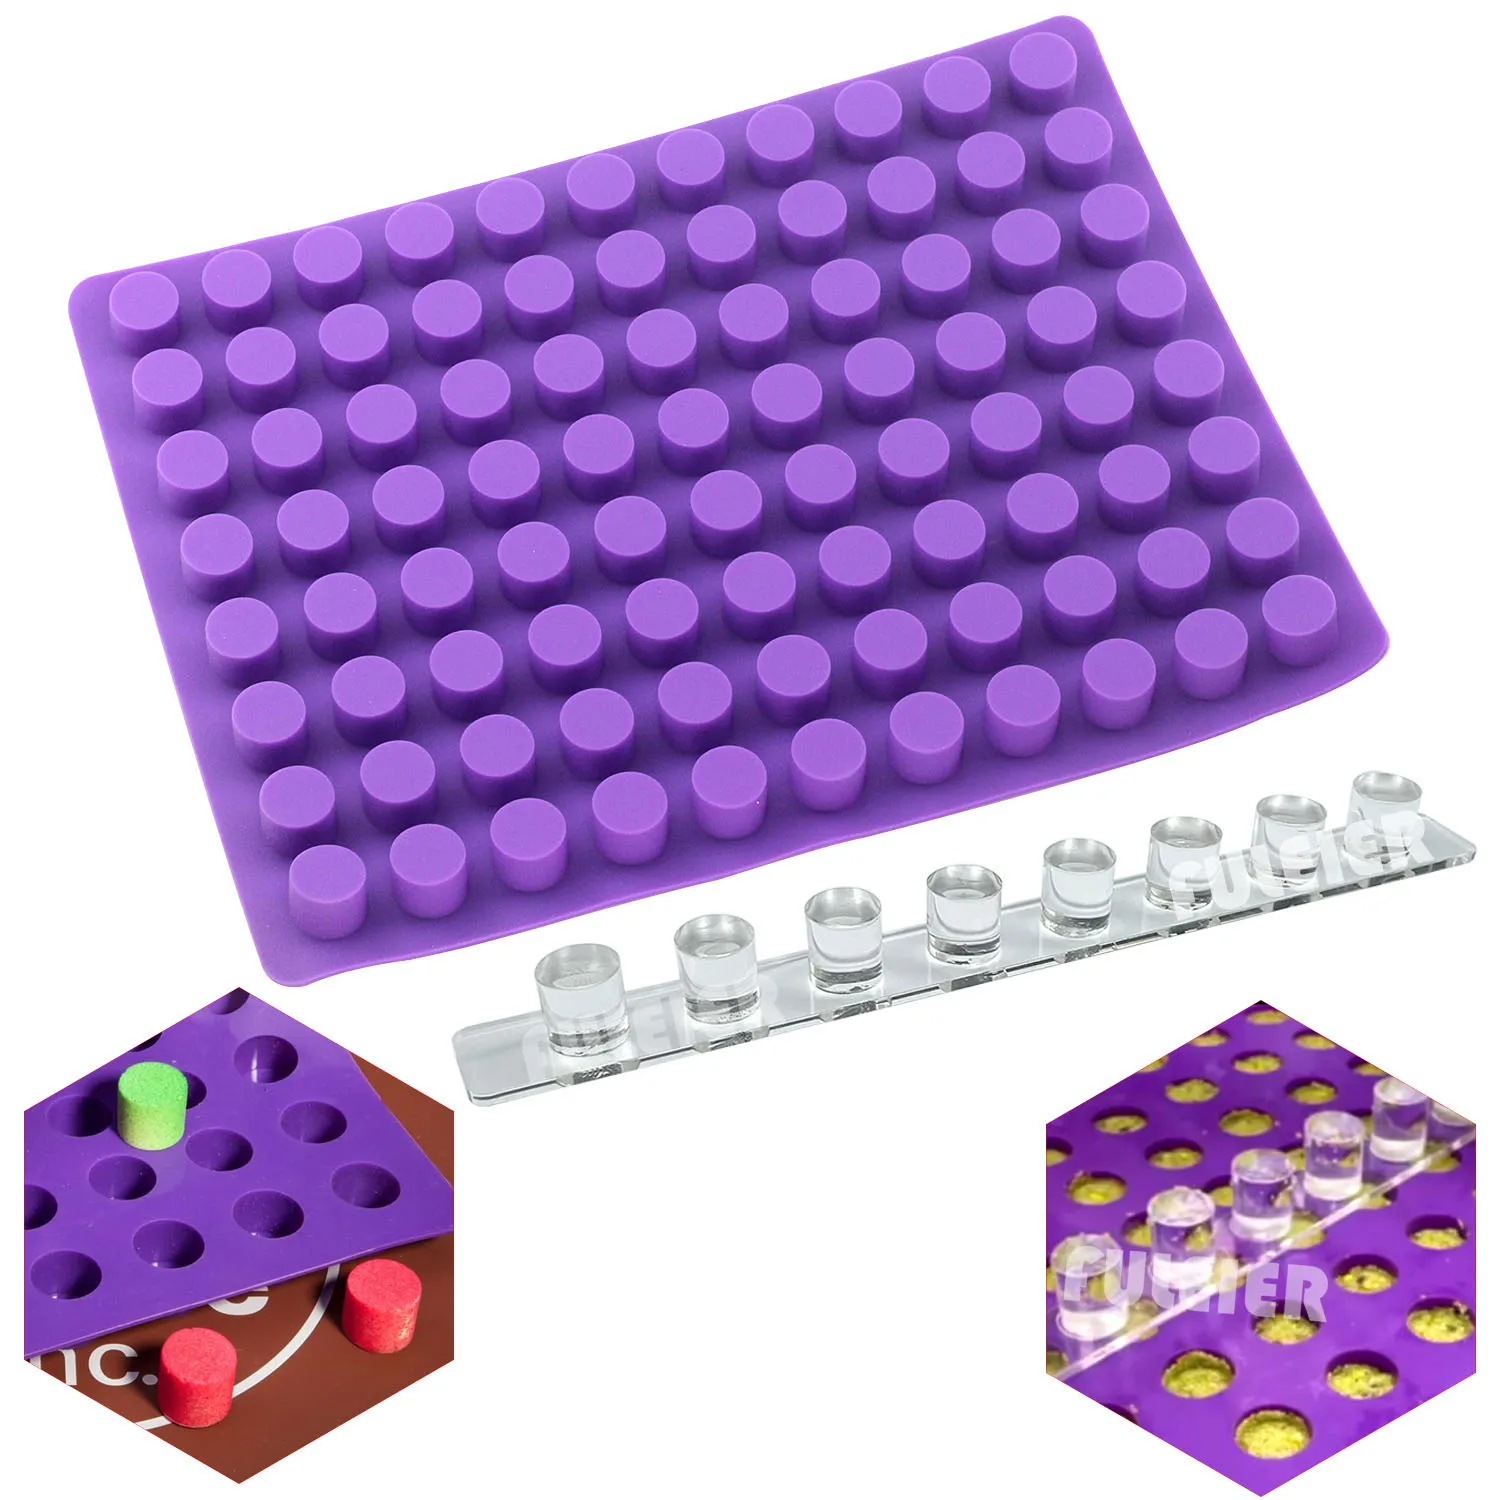 https://ae01.alicdn.com/kf/H574e79e6ba494d208a09cdde1f30f59ce/88-Cavities-Mini-Silicone-Mold-And-Press-Baking-Tool-Cheese-Cakes-Moulds-For-Chocolate-Truffle-Jelly.jpg